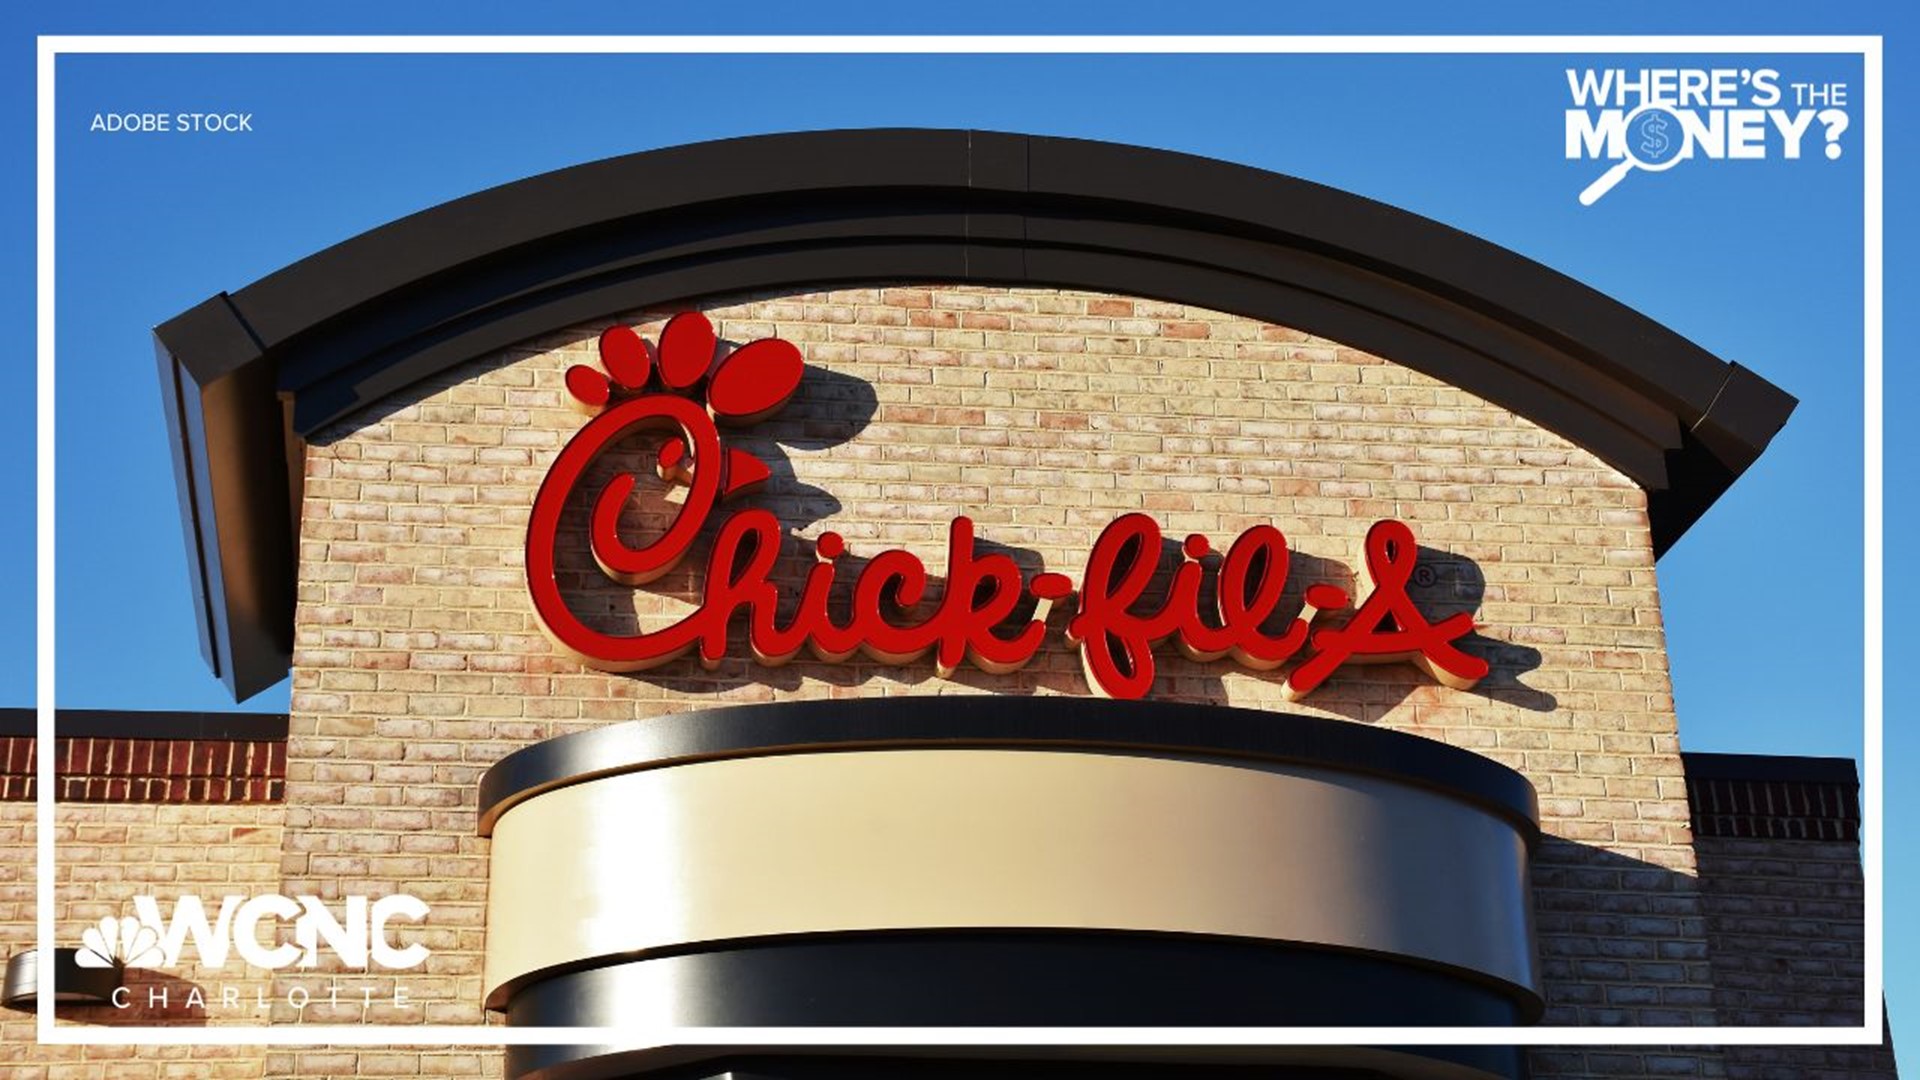 Chick-fil-A's new distribution center will create more than 85 jobs paying an average of $58,000 per year, Gov. Roy Cooper announced.